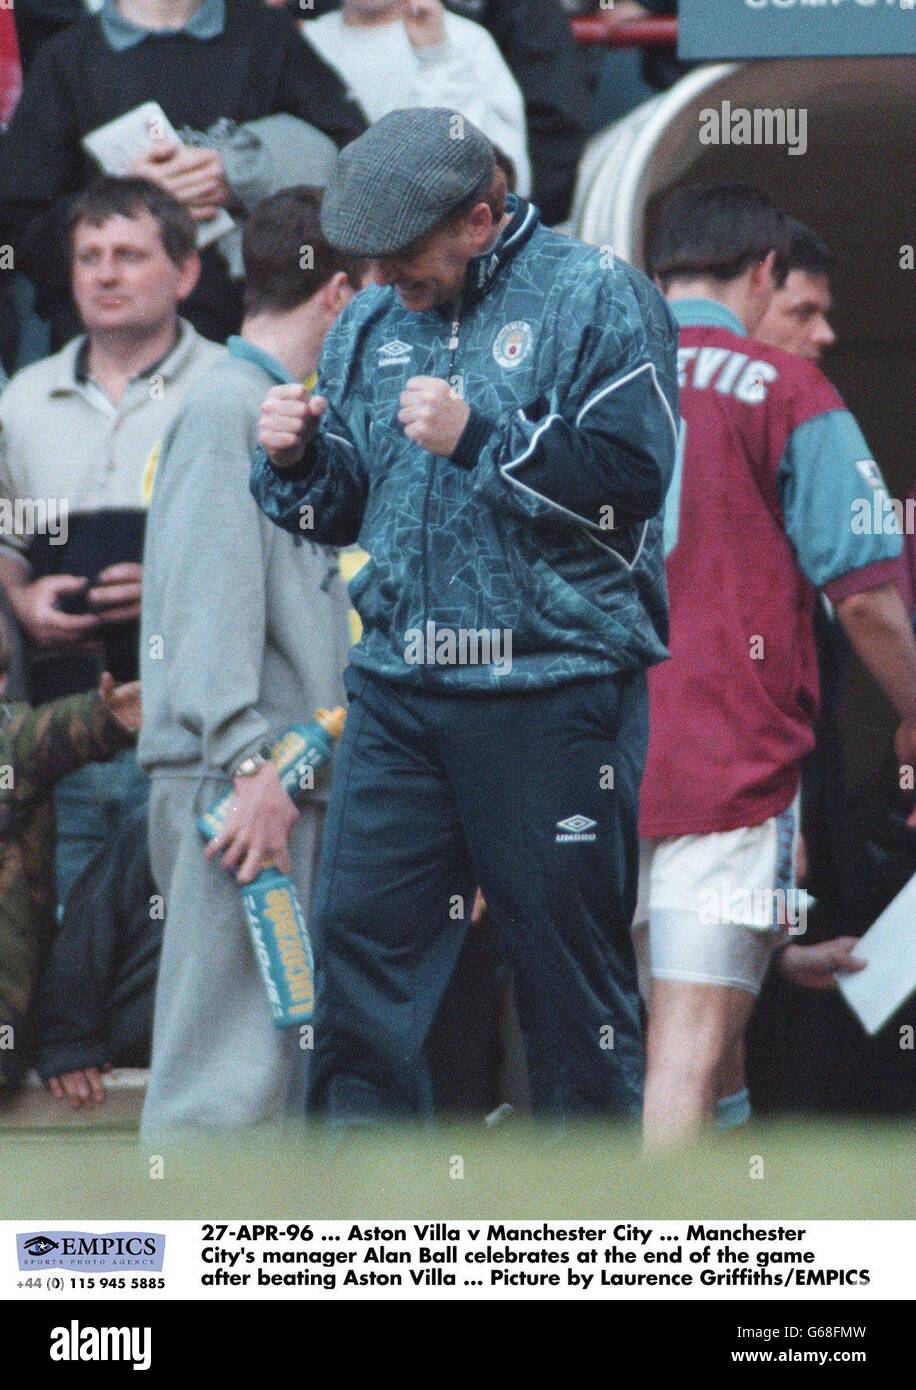 27-APR-96, Aston Villa v Manchester City, Manchester City's manager Alan Ball celebrates at the end of the game after beating Aston Villa, Picture by Laurence Griffiths/EMPICS Stock Photo